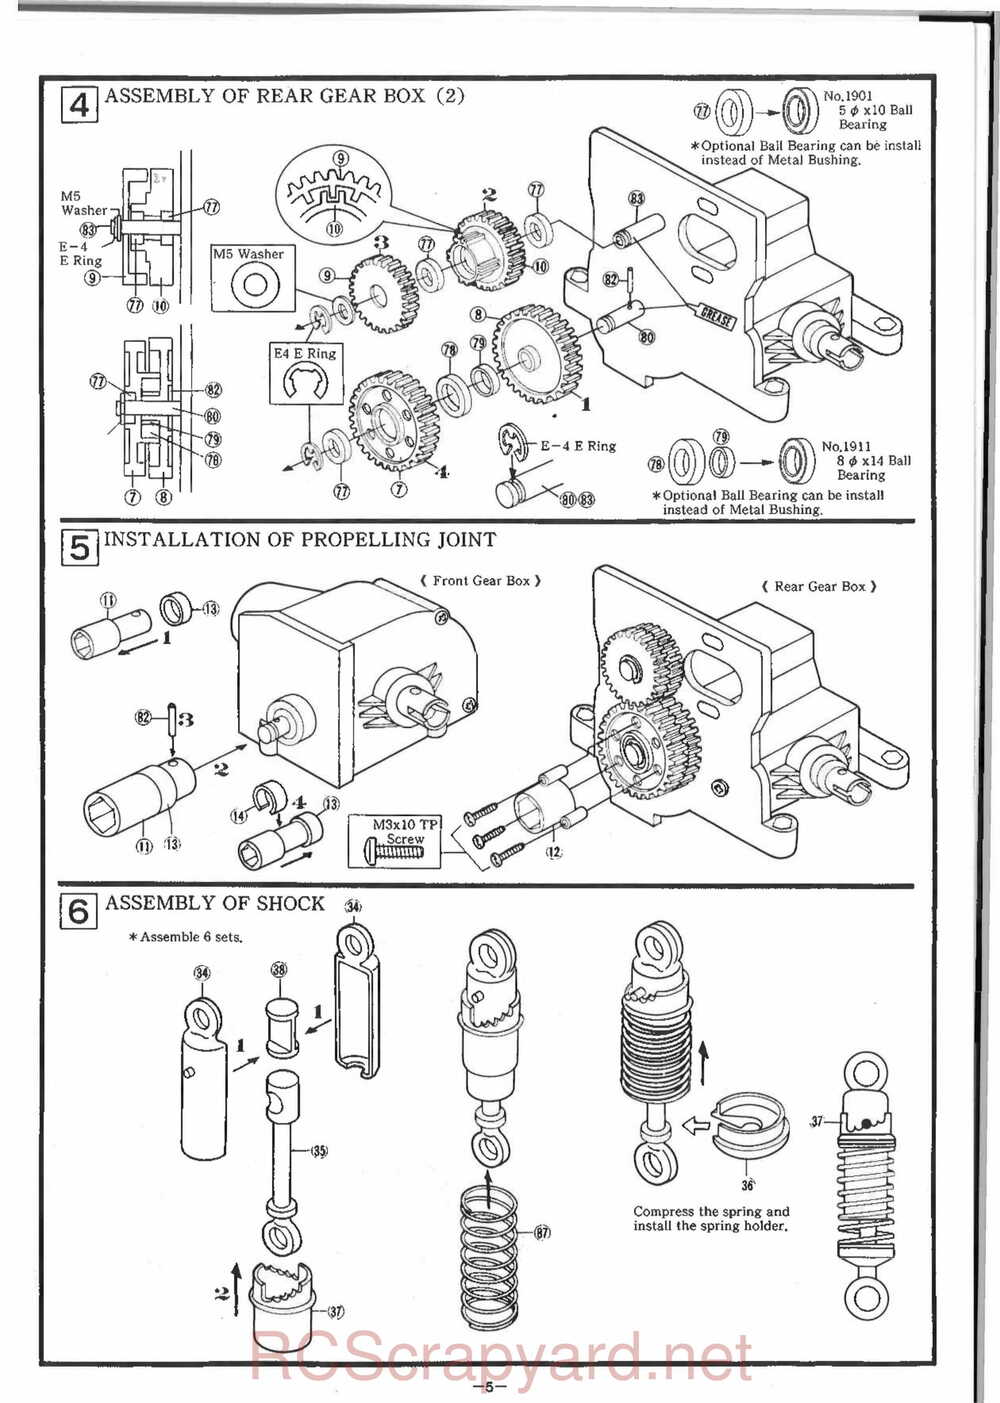 Kyosho - 4253 4260 - Scale-Car-Series - Manual - Page 05